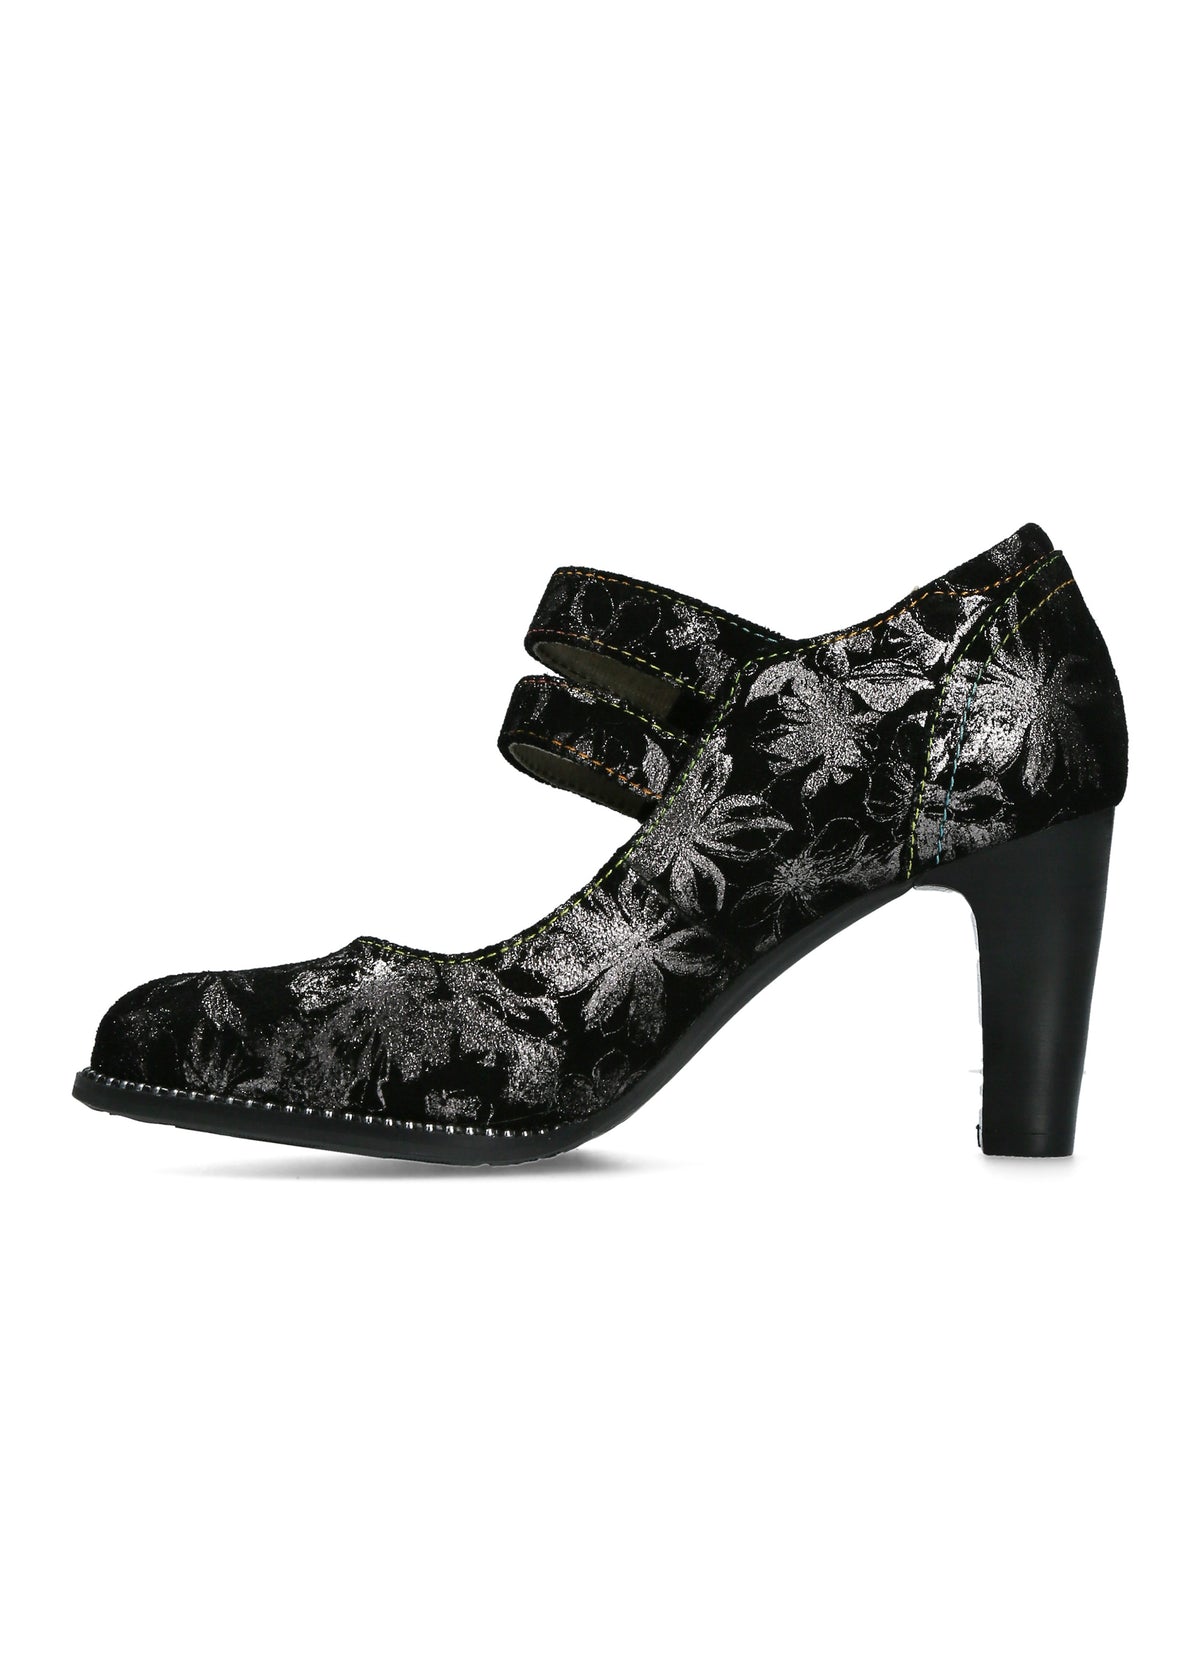 High heels with double straps - black and silver pattern